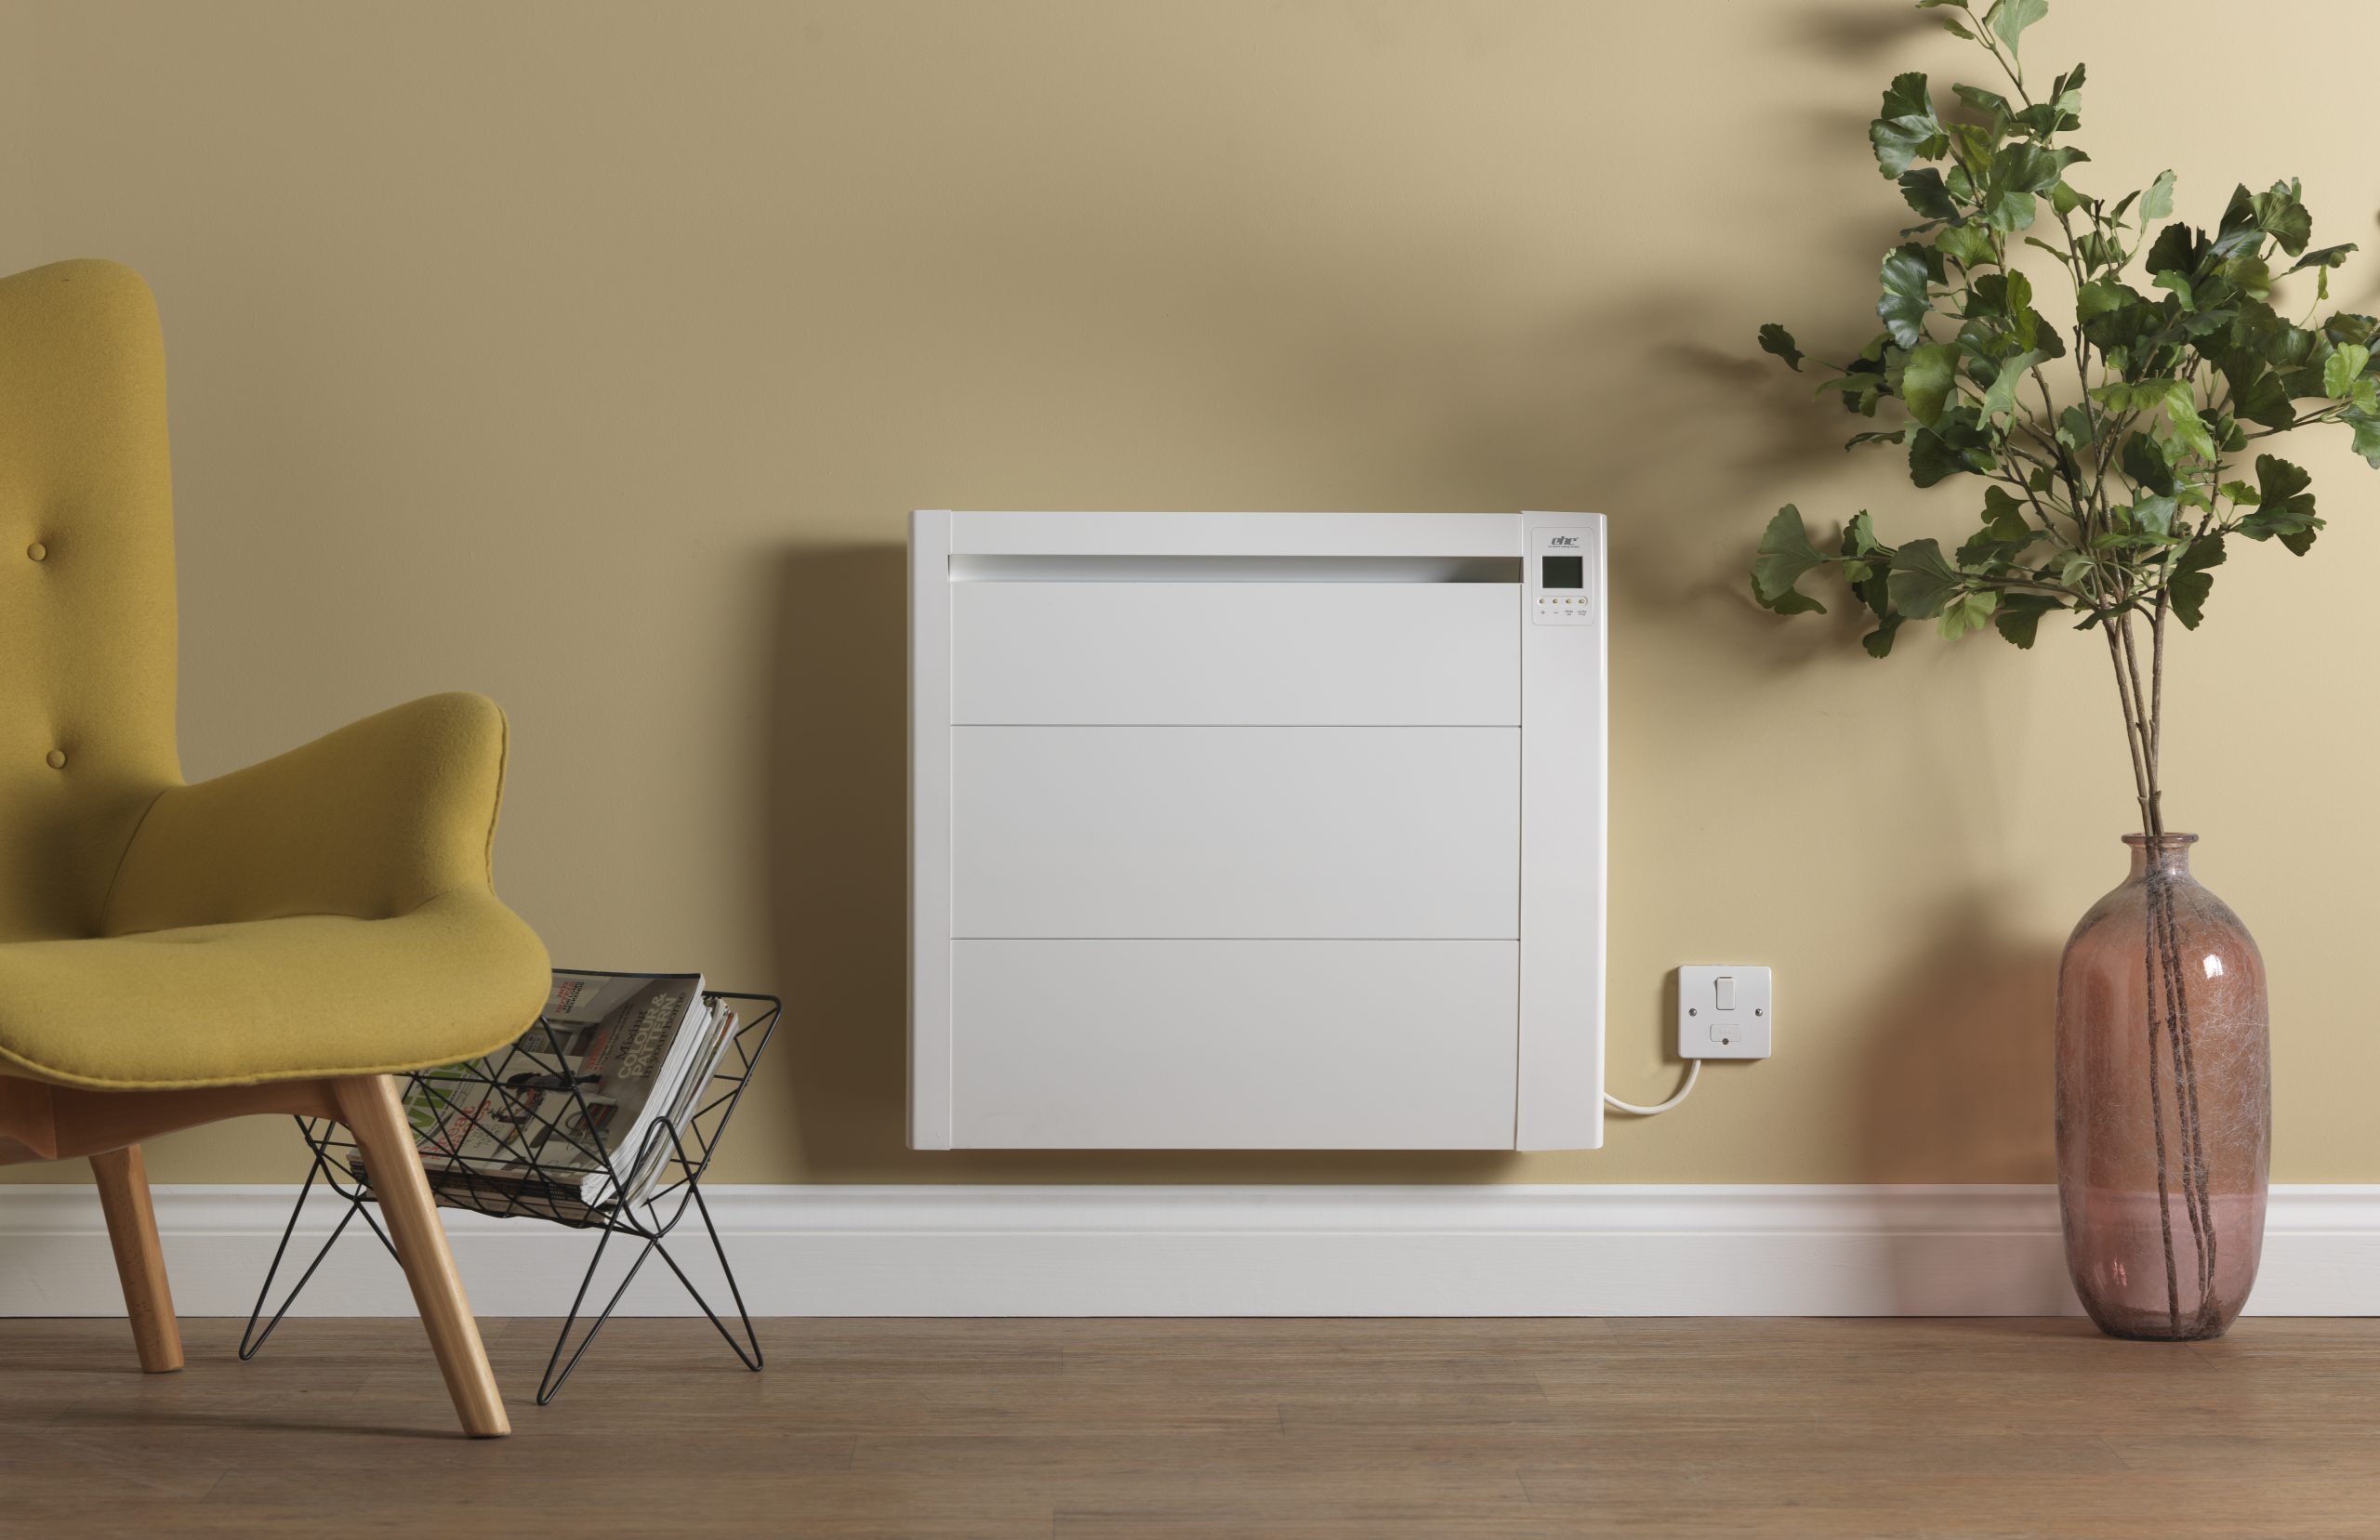 Electric heating is continually becoming an increasingly viable option for heating properties in the UK. @EHC_UK